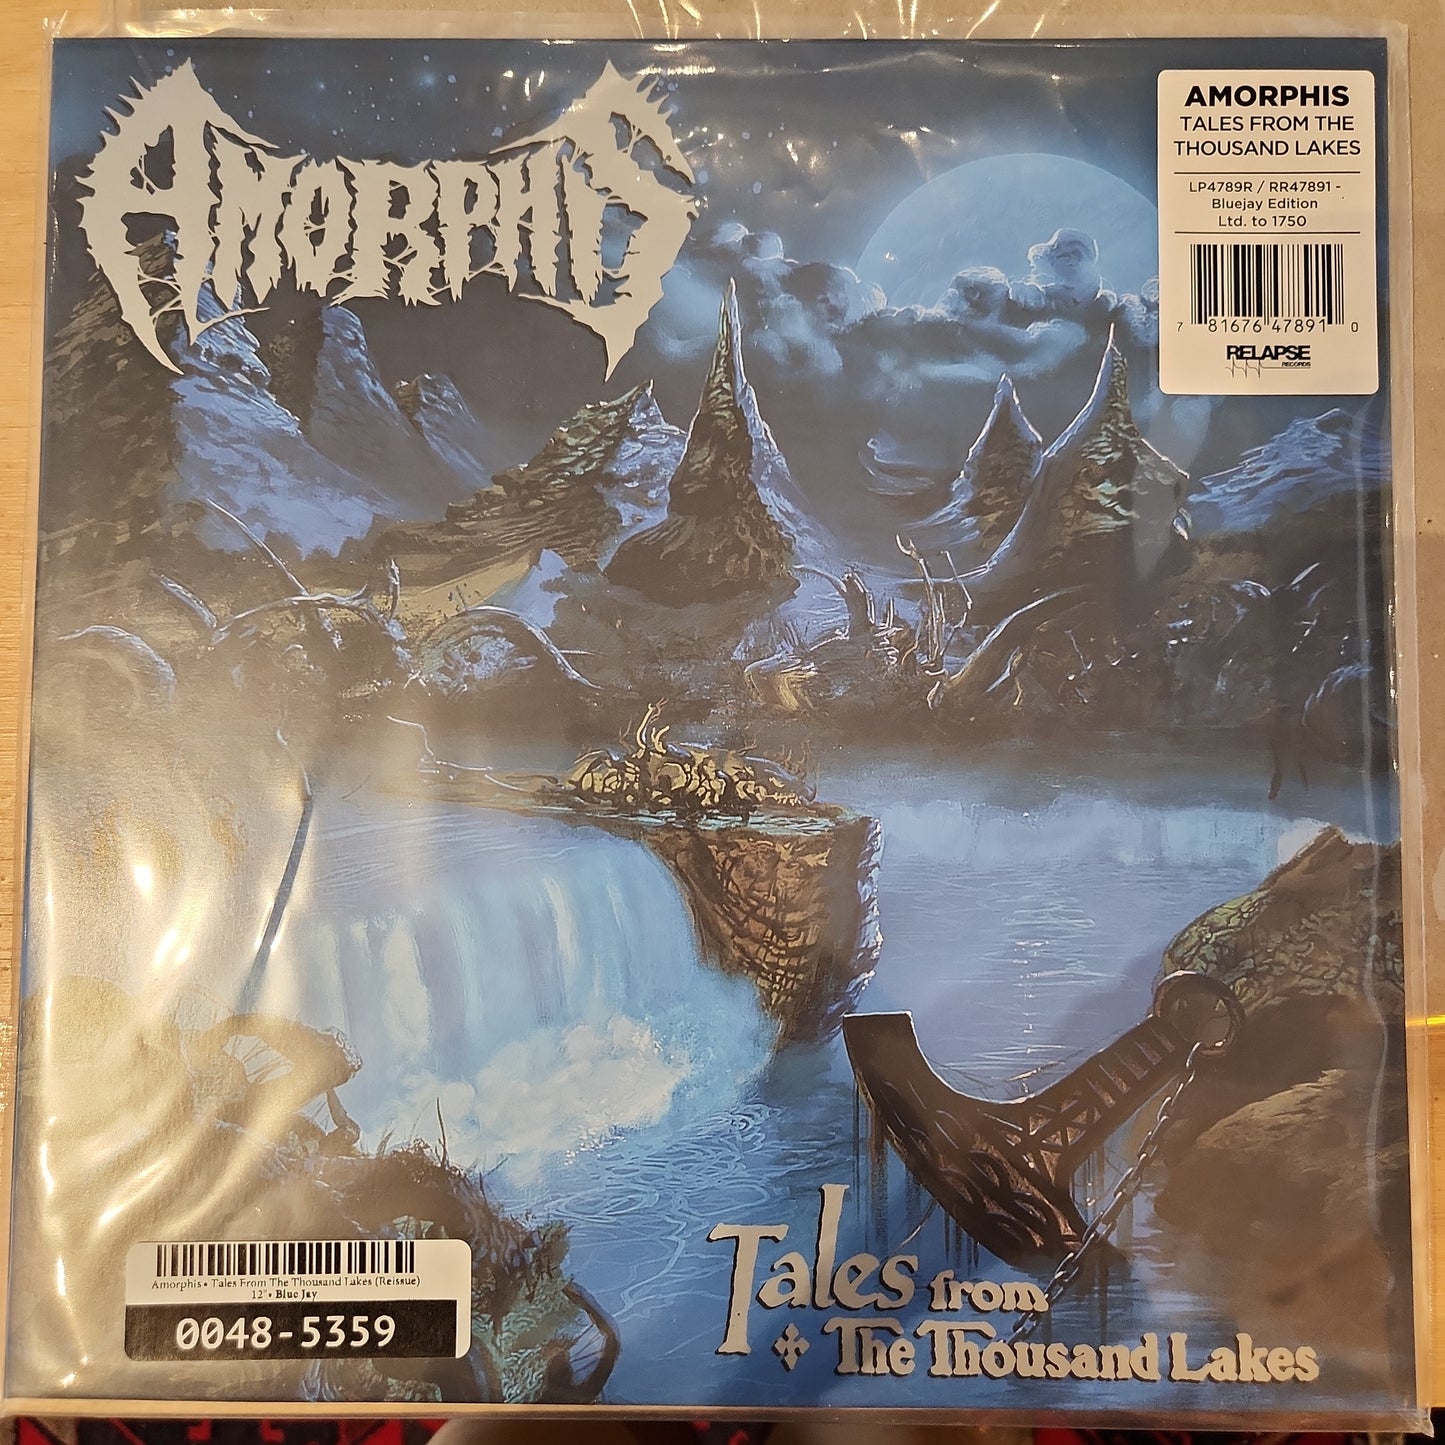 Amorphis - Tales from the Thousand Lakes - Vinyl LP